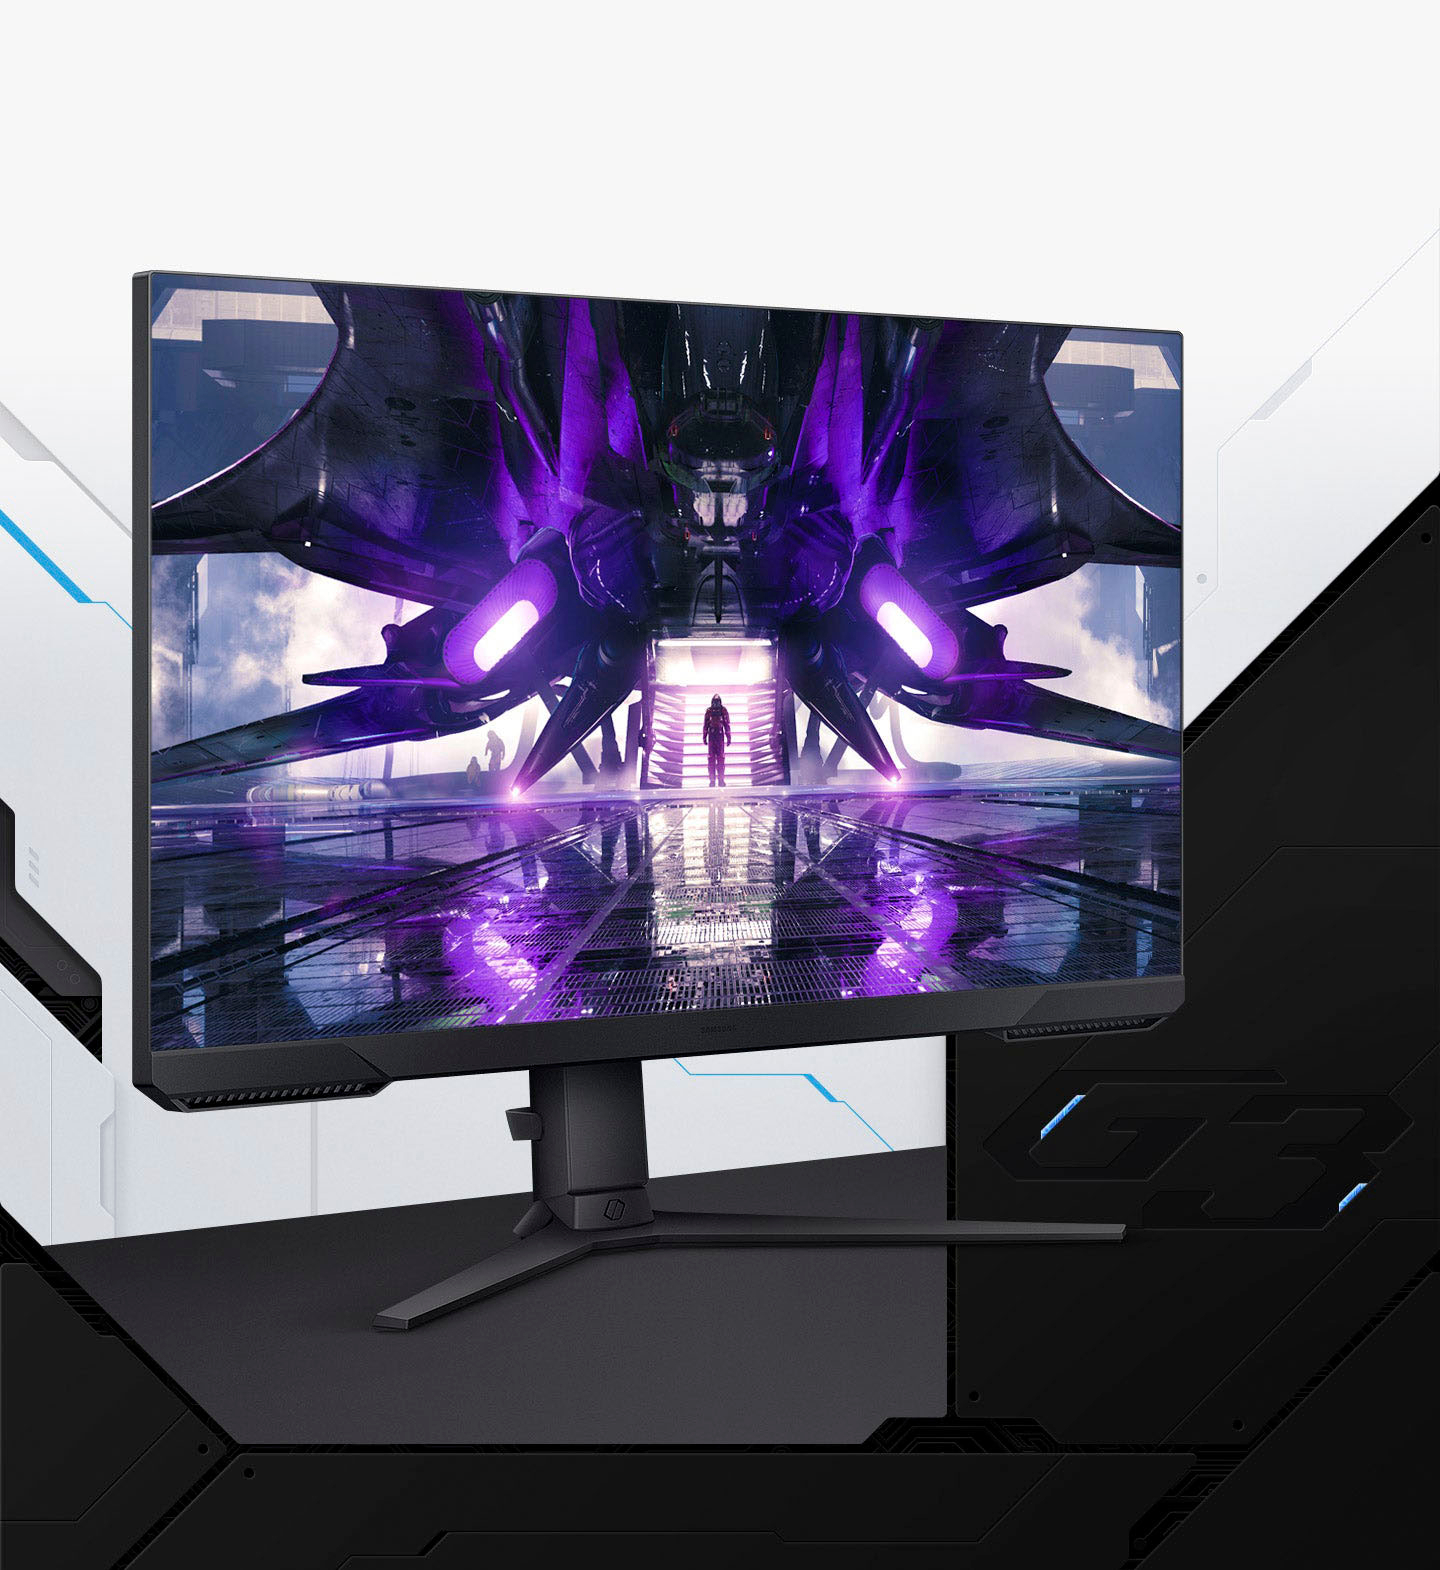 Samsung Odyssey G3, Odyssey G5, Odyssey G7 Gaming Monitors With